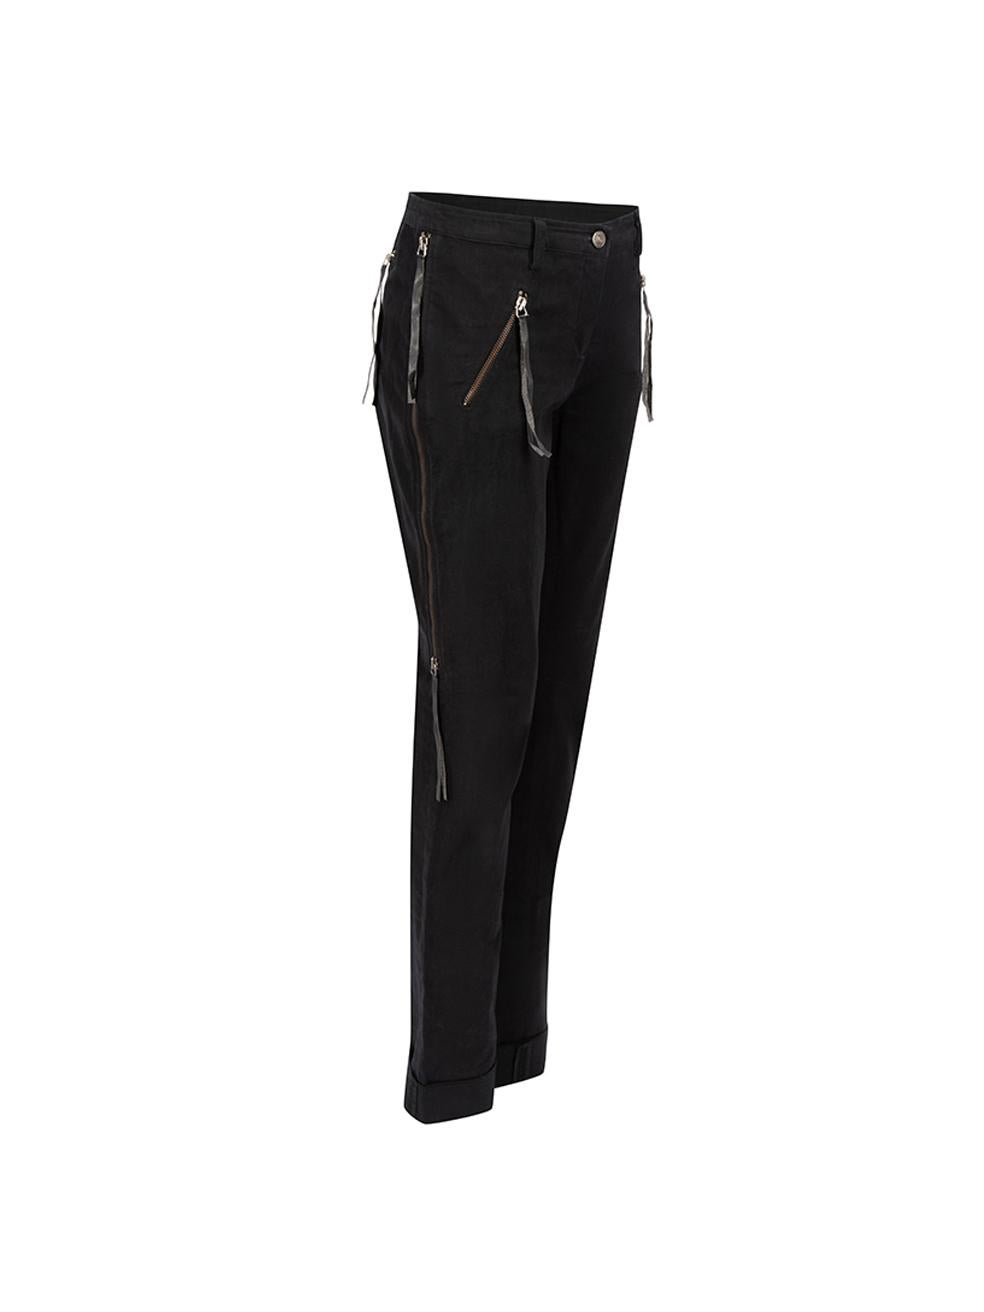 CONDITION is Very good. Minimal wear to trousers is evident. Minimal wear to the outer fabric and there are marks/fluff to the bottom part of the trousers legs. There is also wear to the zip tassels on this used Versus Versace designer resale item.